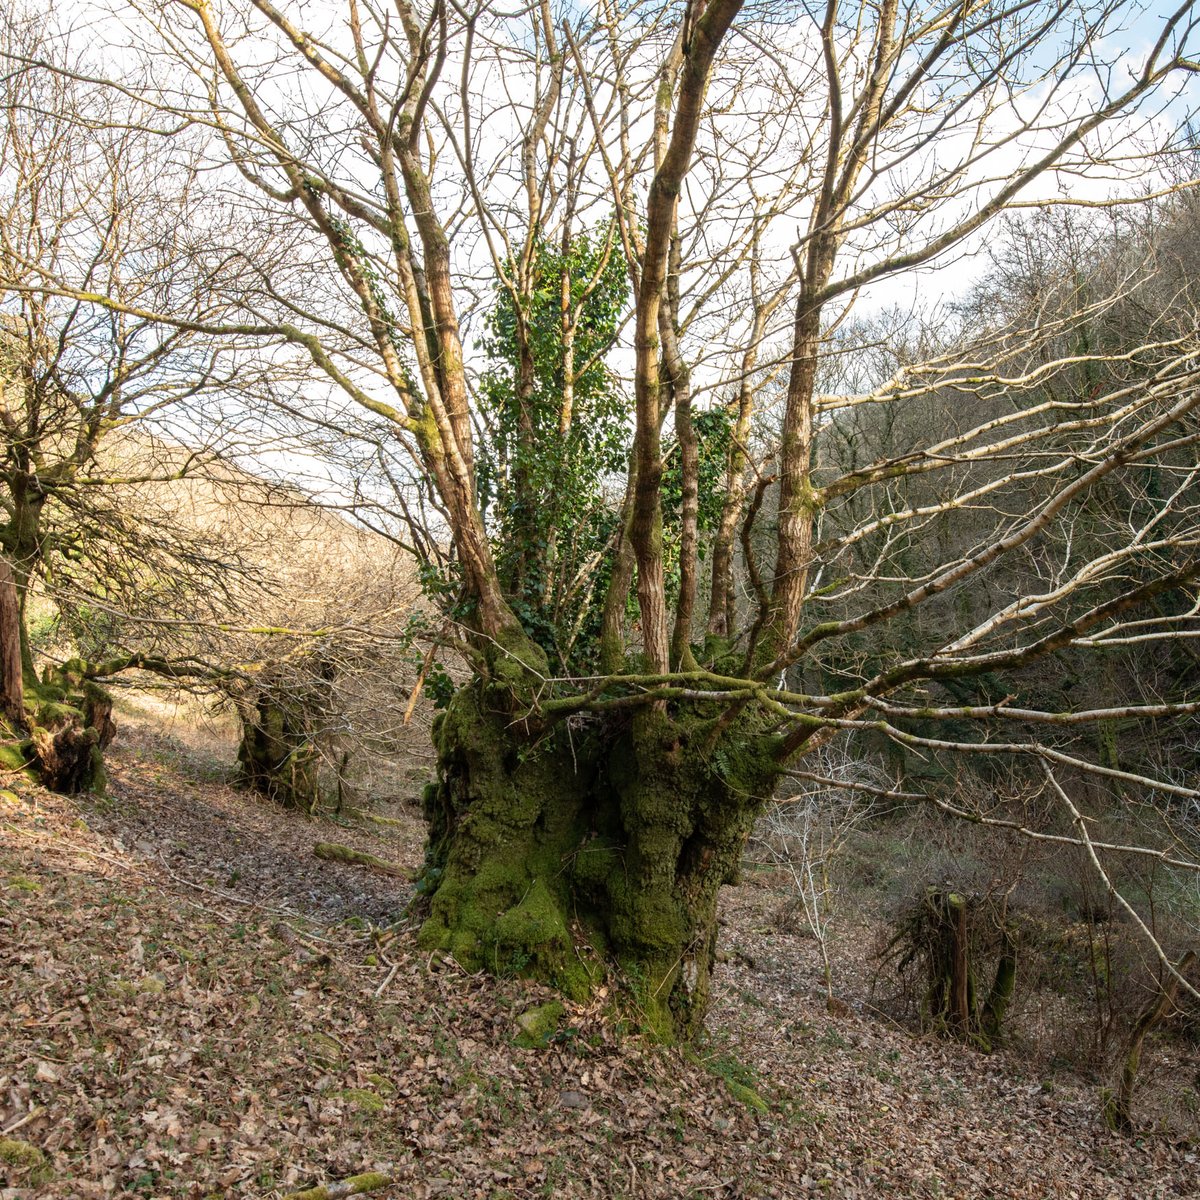 Thought that we would get involved with #thicktrunktuesday for the first time with this old, pollarded oak seen last week in the woods above Porlock in #exmoor in Hawkcombe NNR. This was the biggest of many such awesome trees.